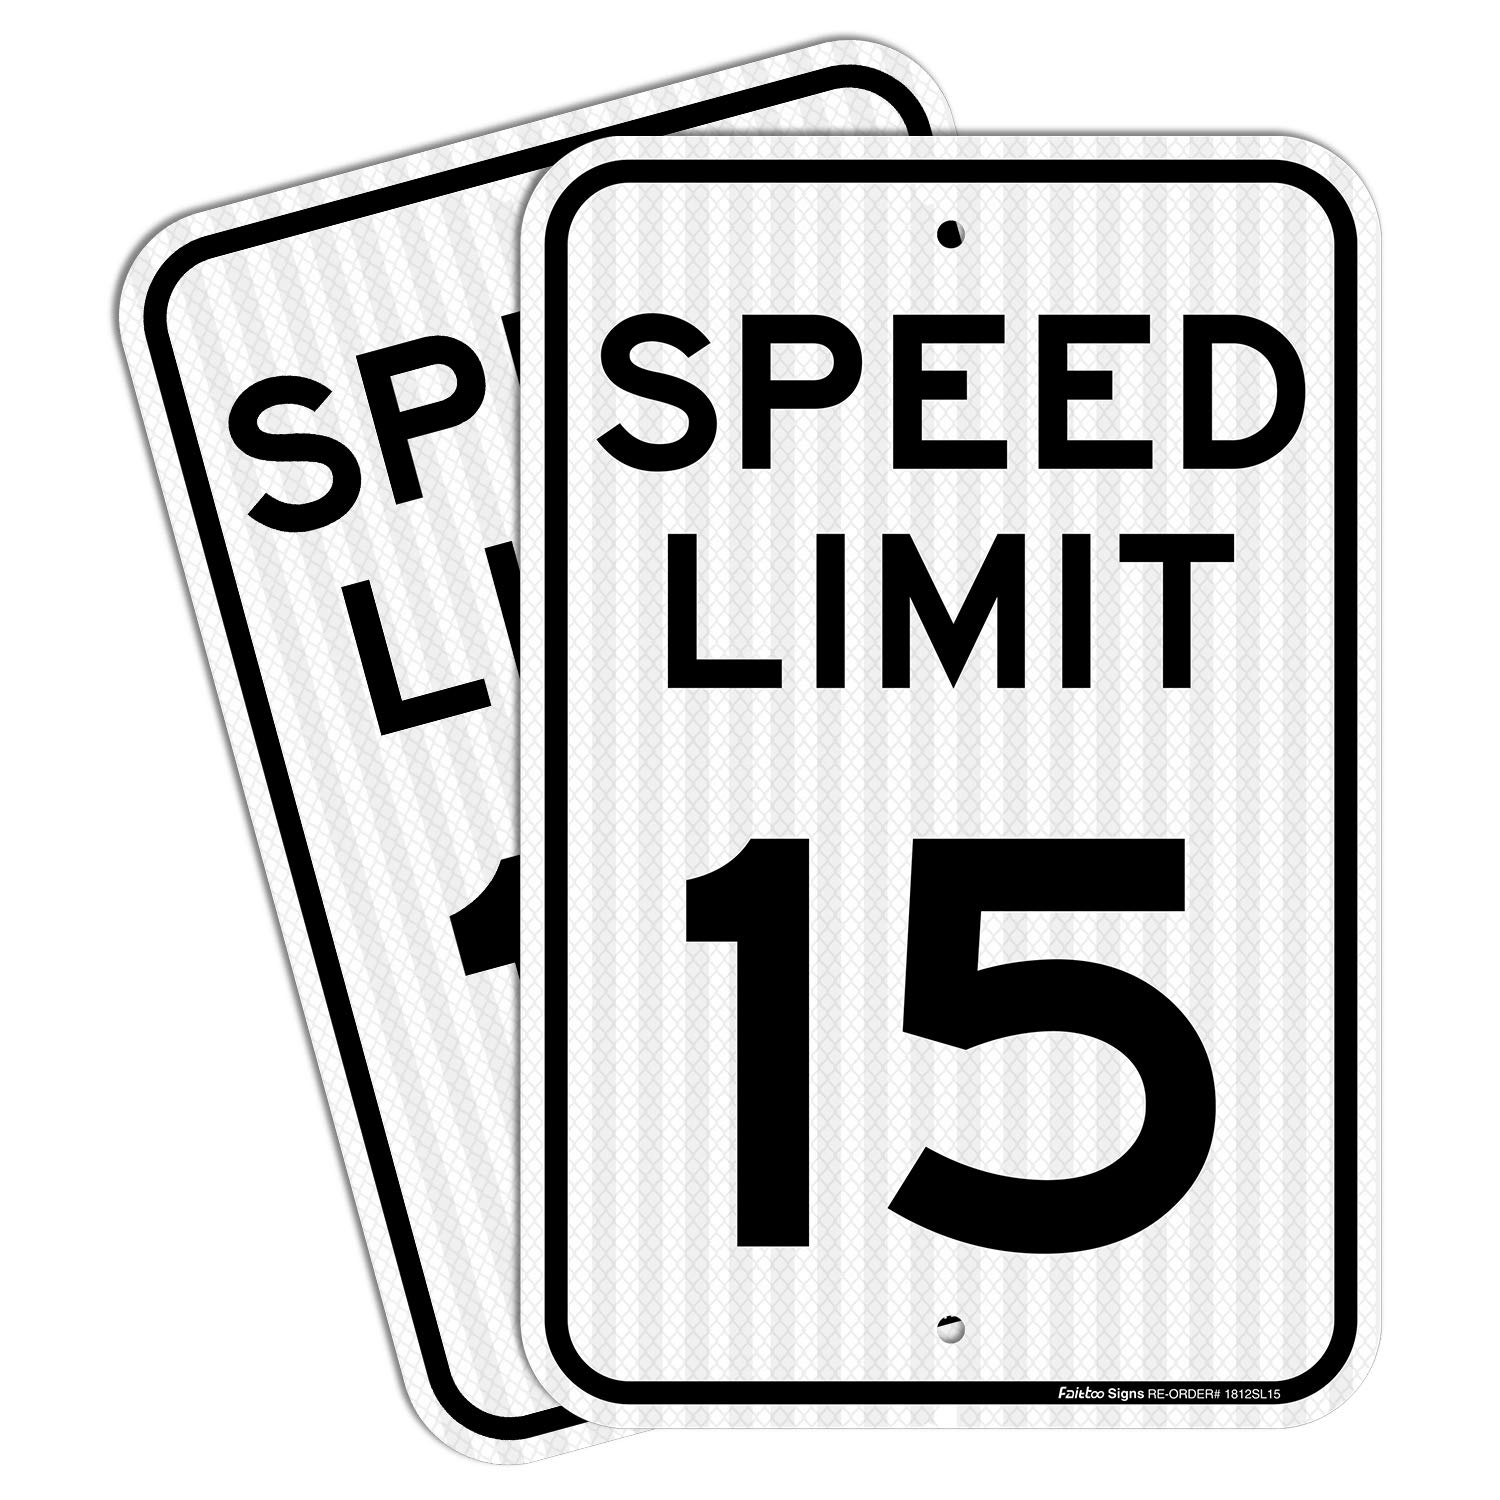 (2 Pack) Speed Limit 15 MPH Sign, 18 x 12 Inches Engineer Grade Reflective Sheeting, Rust Free Aluminum, Weather Resistant, Waterproof, Durable Ink, Easy to Mount